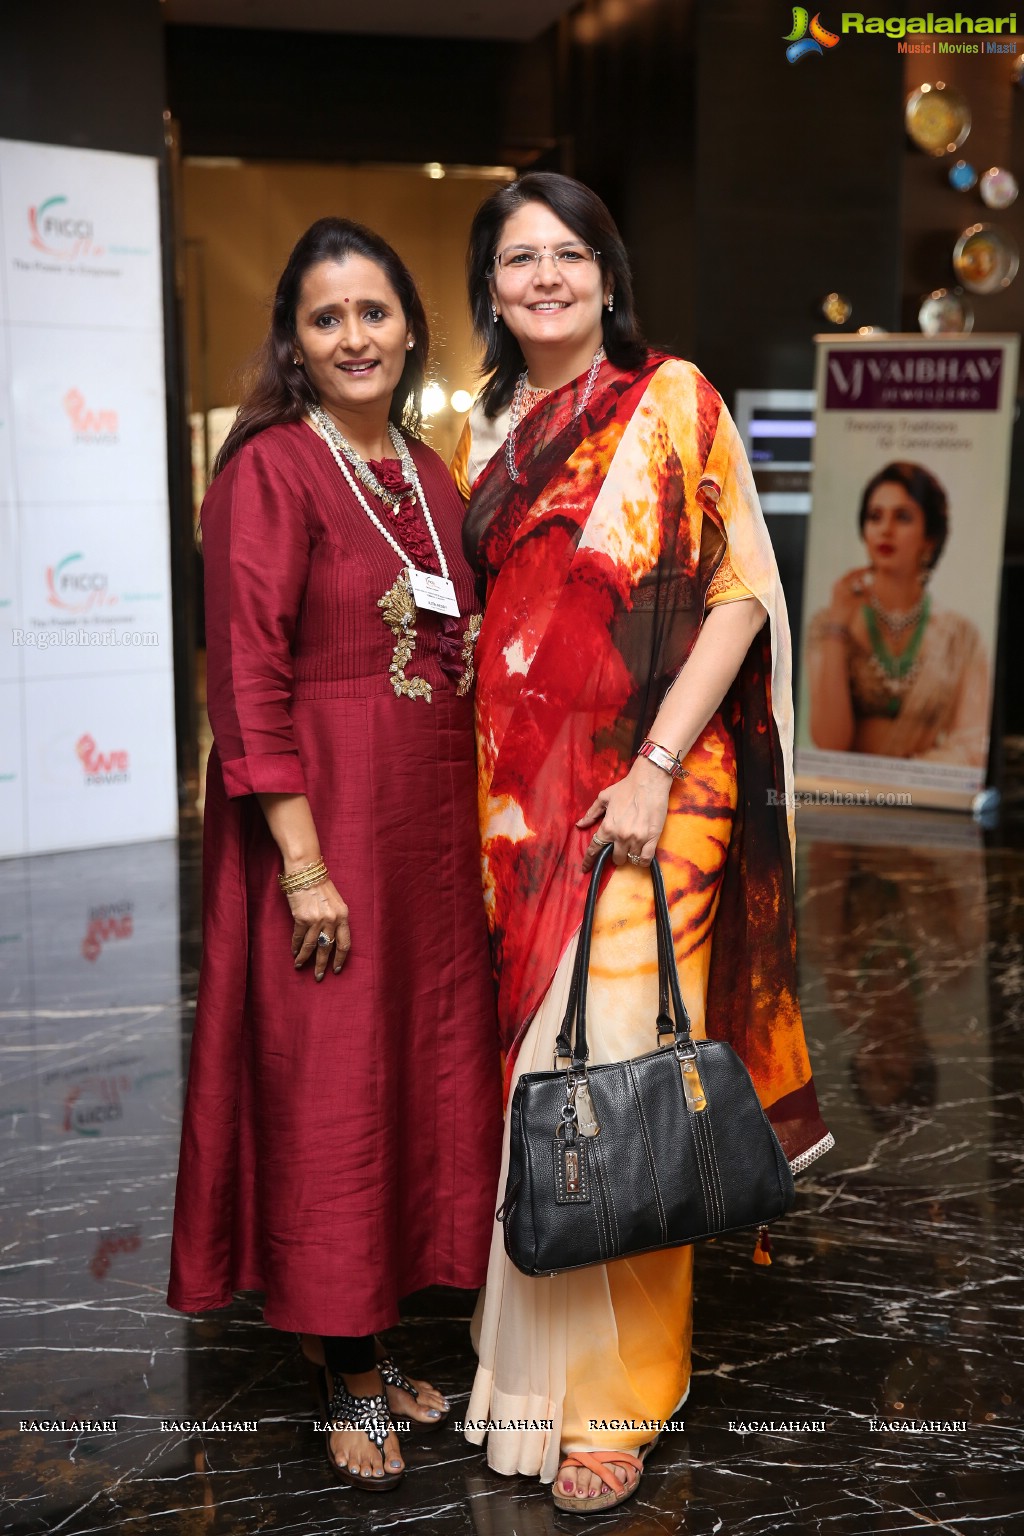 FICCI - The Talk on Women Who Have Paved Their Own Path by Chhavi Rajawat